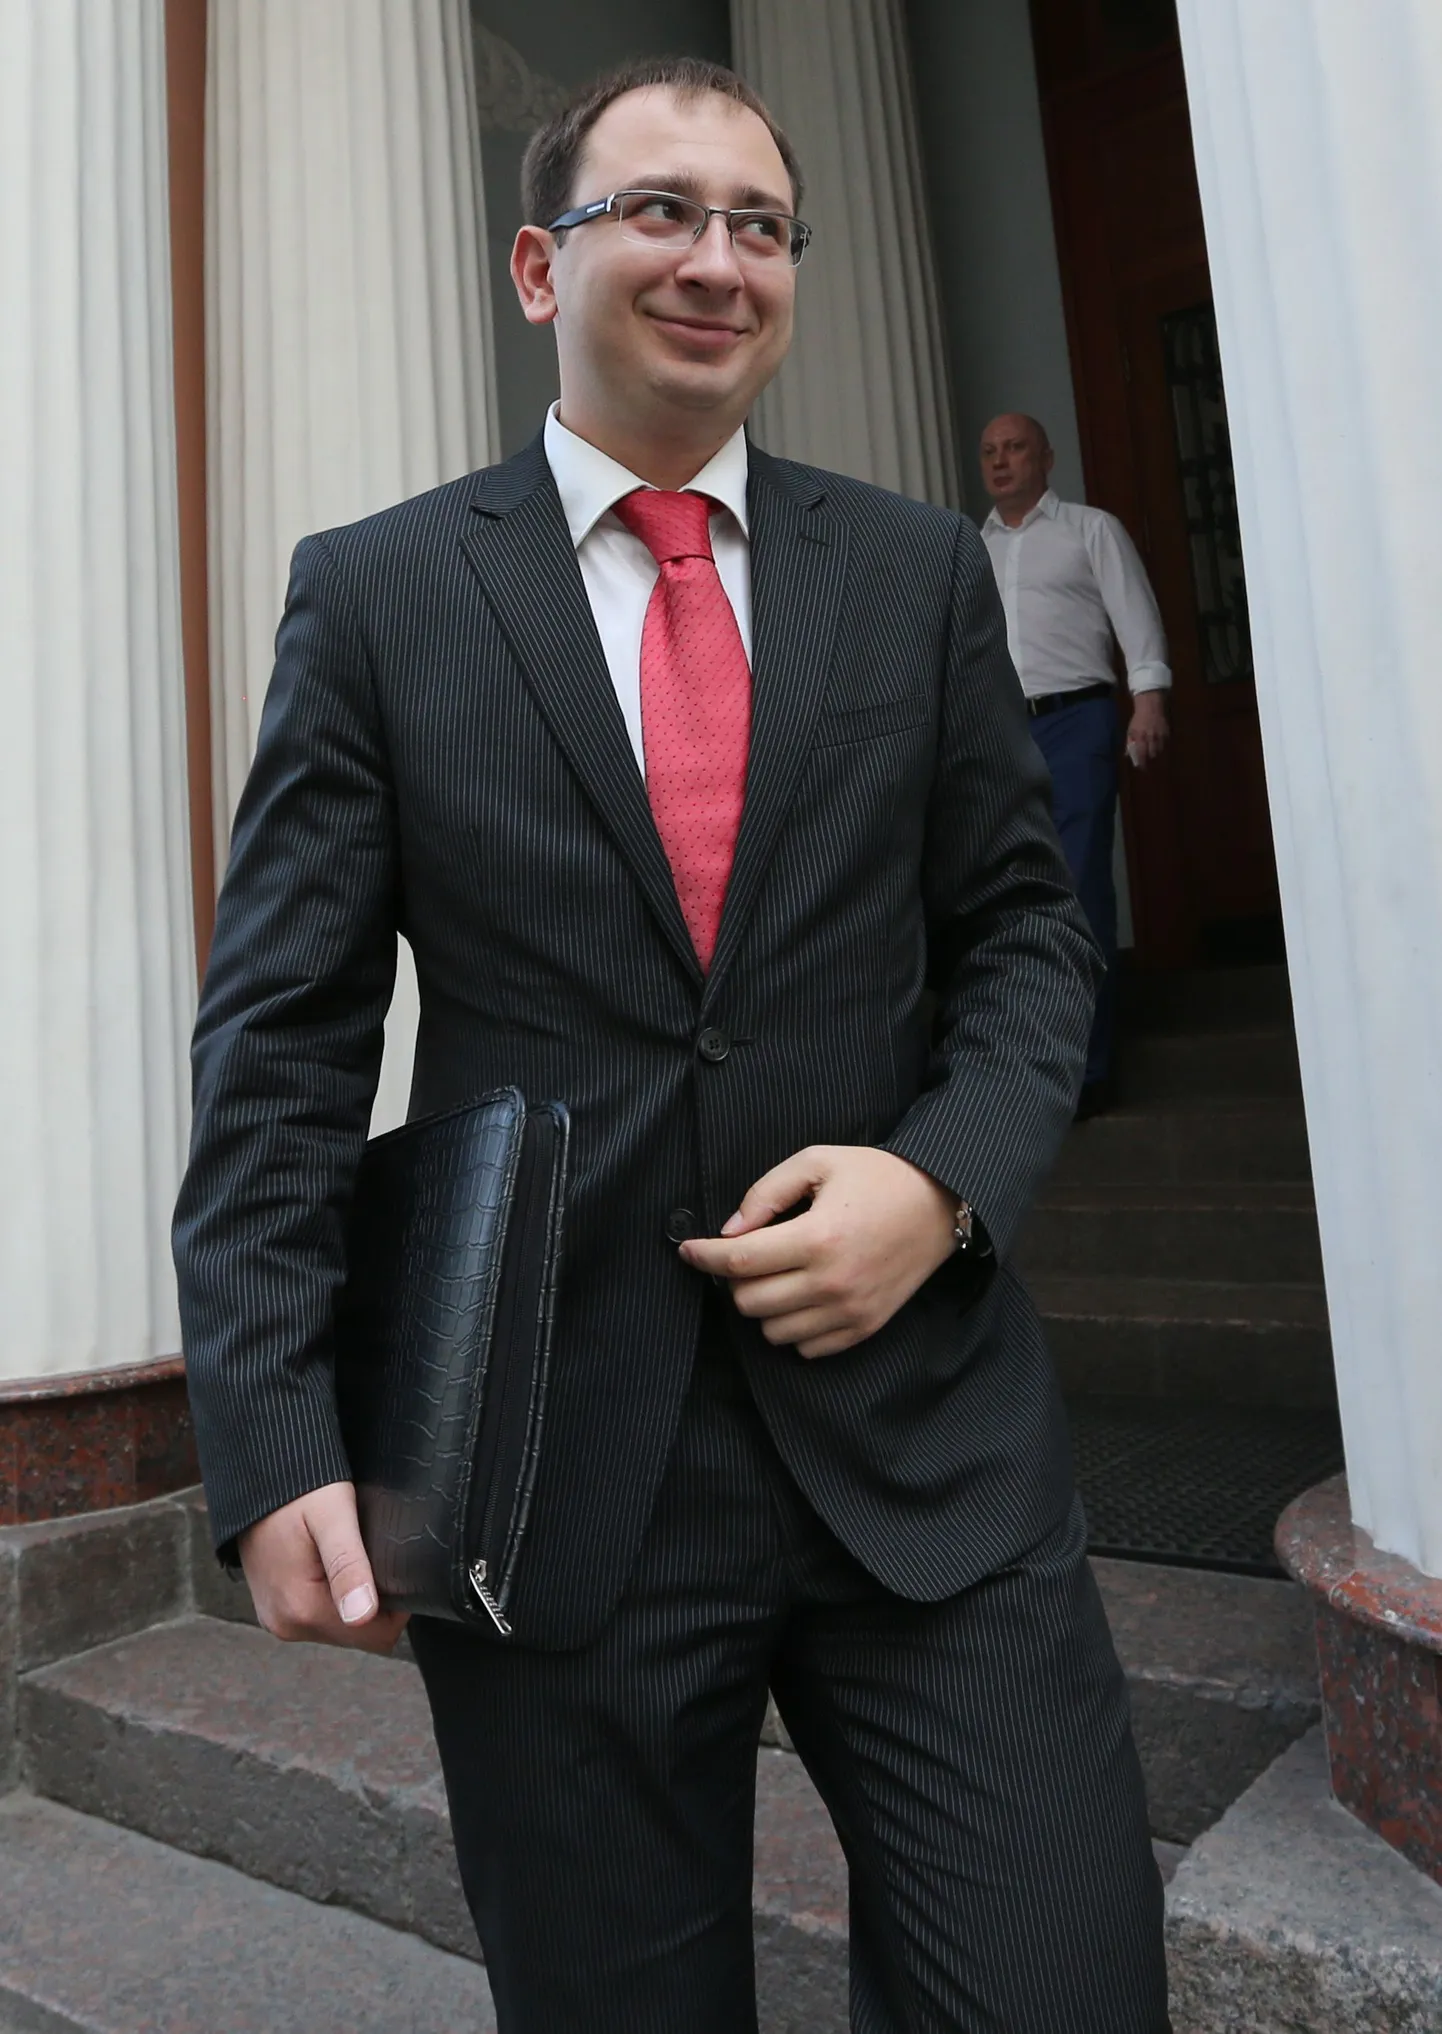 ITAR-TASS: MOSCOW, RUSSIA. AUGUST 8, 2013. Lawyer Nikolai Polozov arrives at the offices of the Moscow Bar Association for a meeting to look into a complaint by Pussy Riot member Yekaterina Samutsevich. Samutsevich has filed a complaint against Nikolai Polozov and Mark Feigin over what she claims to be misconduct and demanded that the two lawyers be stripped of their right to practice. Polozov and Feigin represented Pussy Riot members during their trial for their controversial  performance at the Cathedral of Christ the Saviour in February 2012. The Moscow Bar Association has adjourned hearing of the complaint till 18 September 2013. (Photo ITAR-TASS / Alexei Nikolsky)